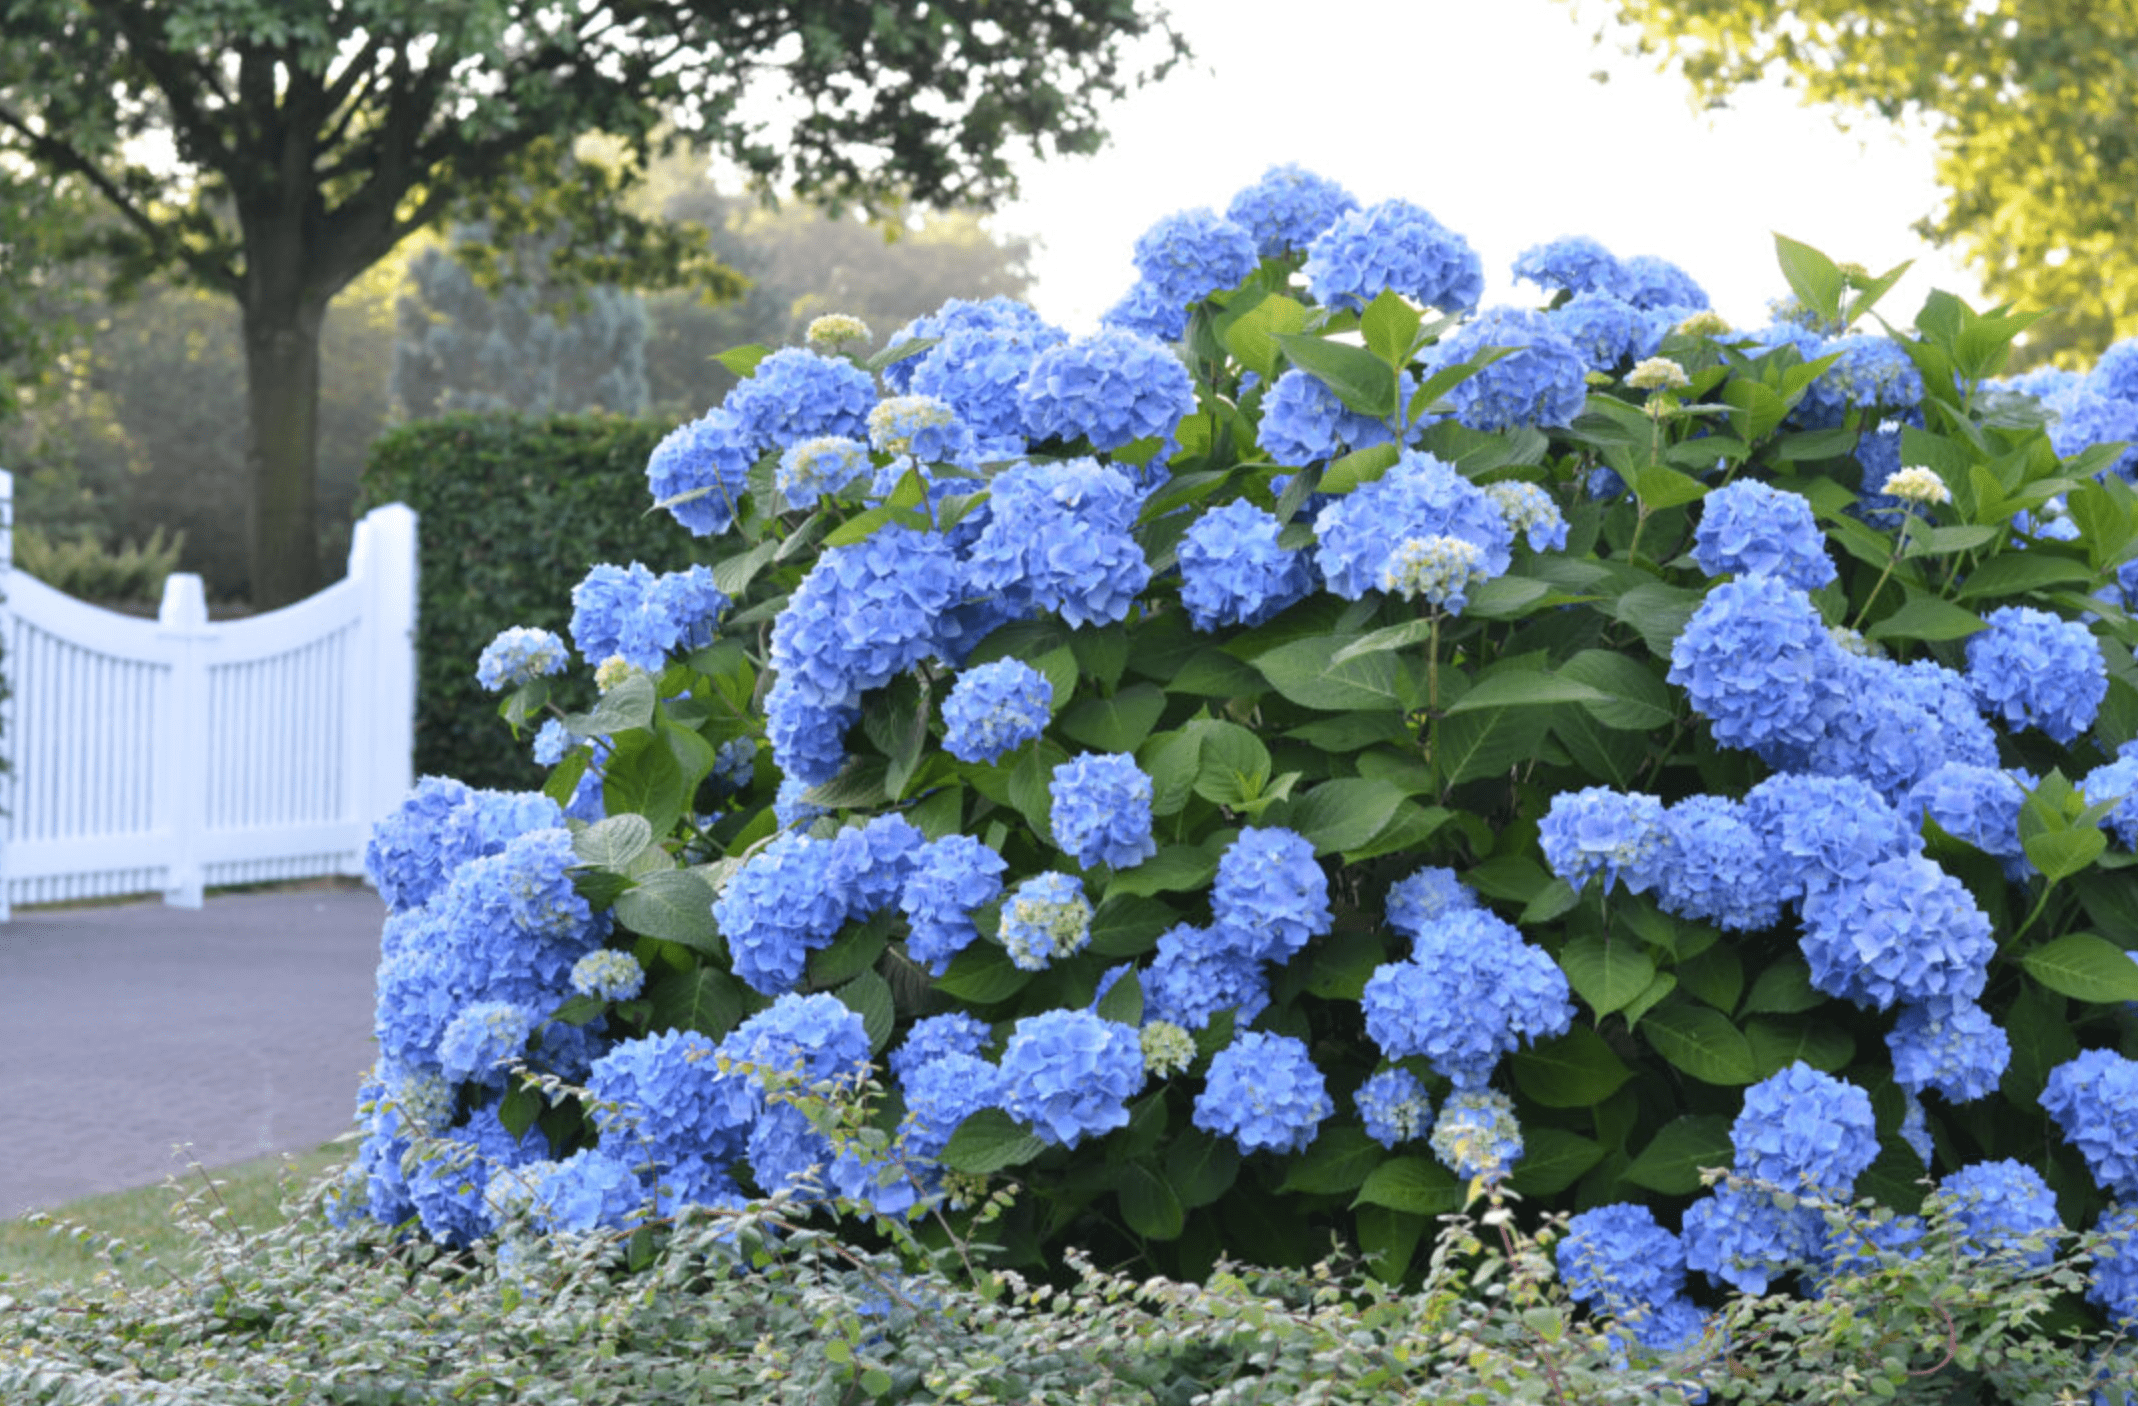 Image of Endless Summer Hydrangea, in full bloom